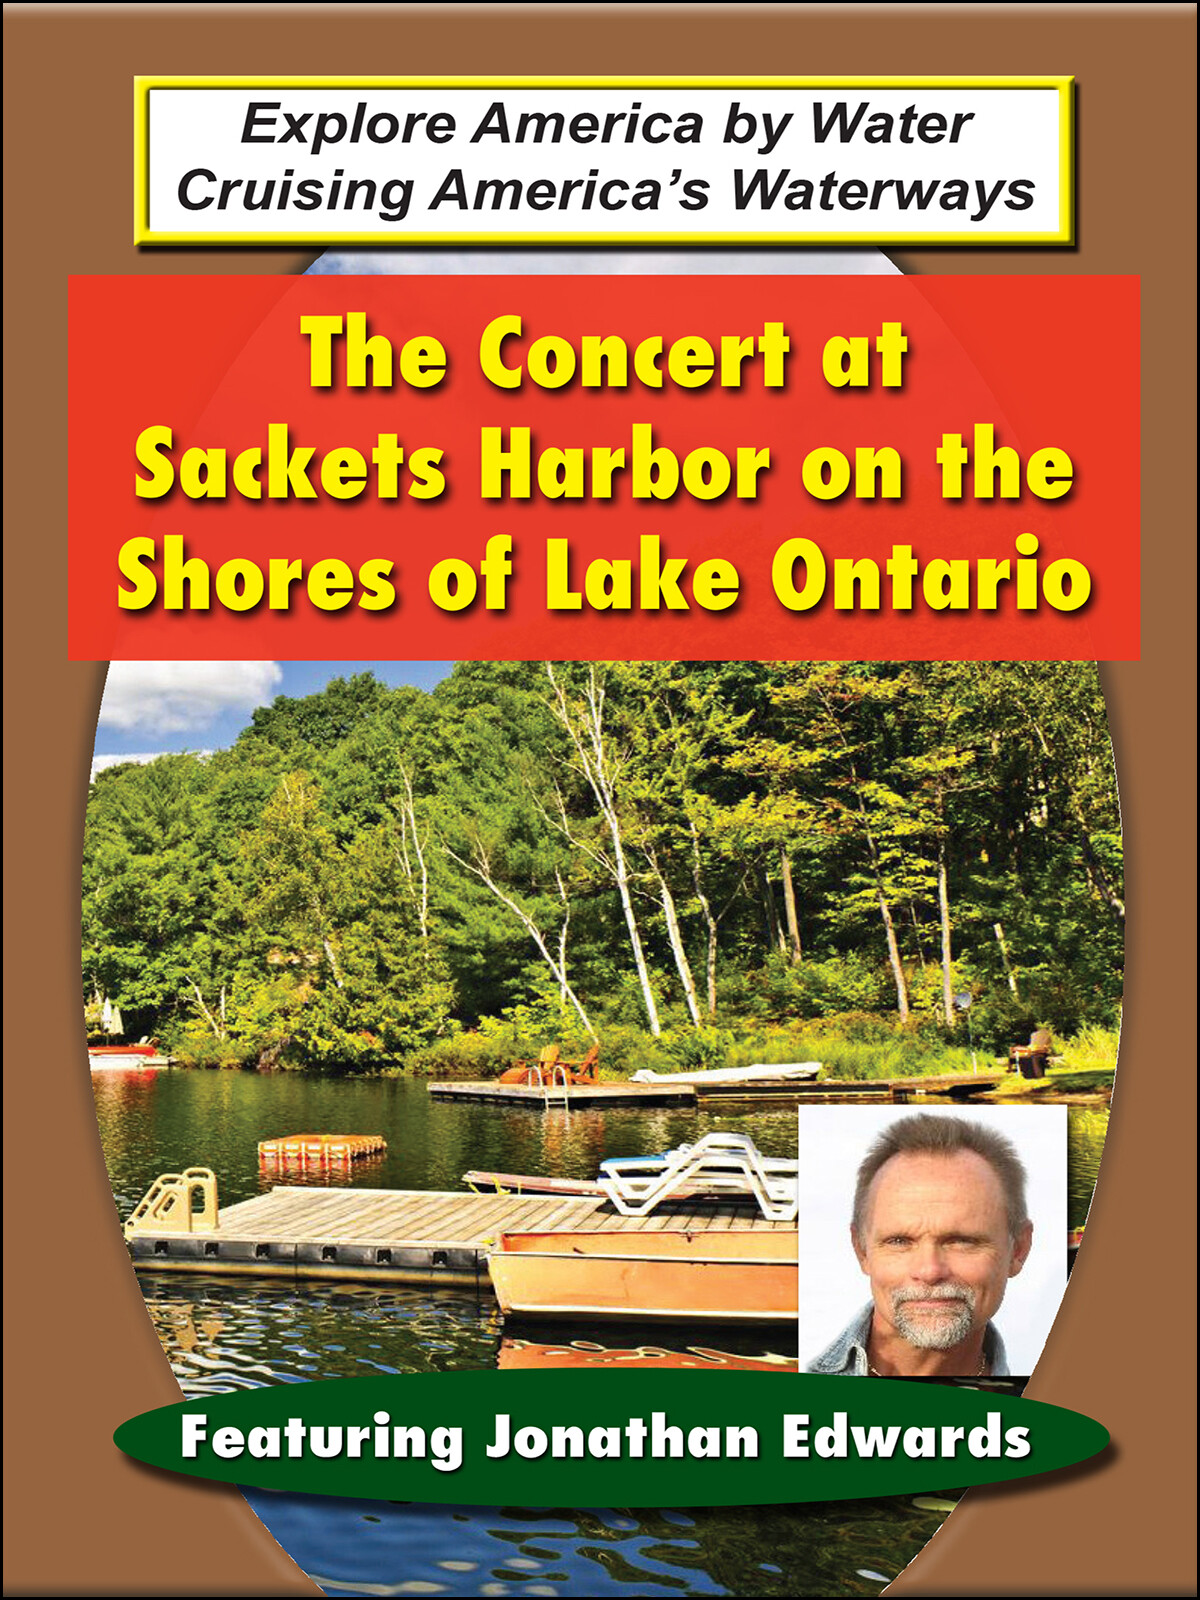 T8917 - The Concert at Sackets Harbor on the Shores of Lake Ontario - Featuring Jonathan Edwards